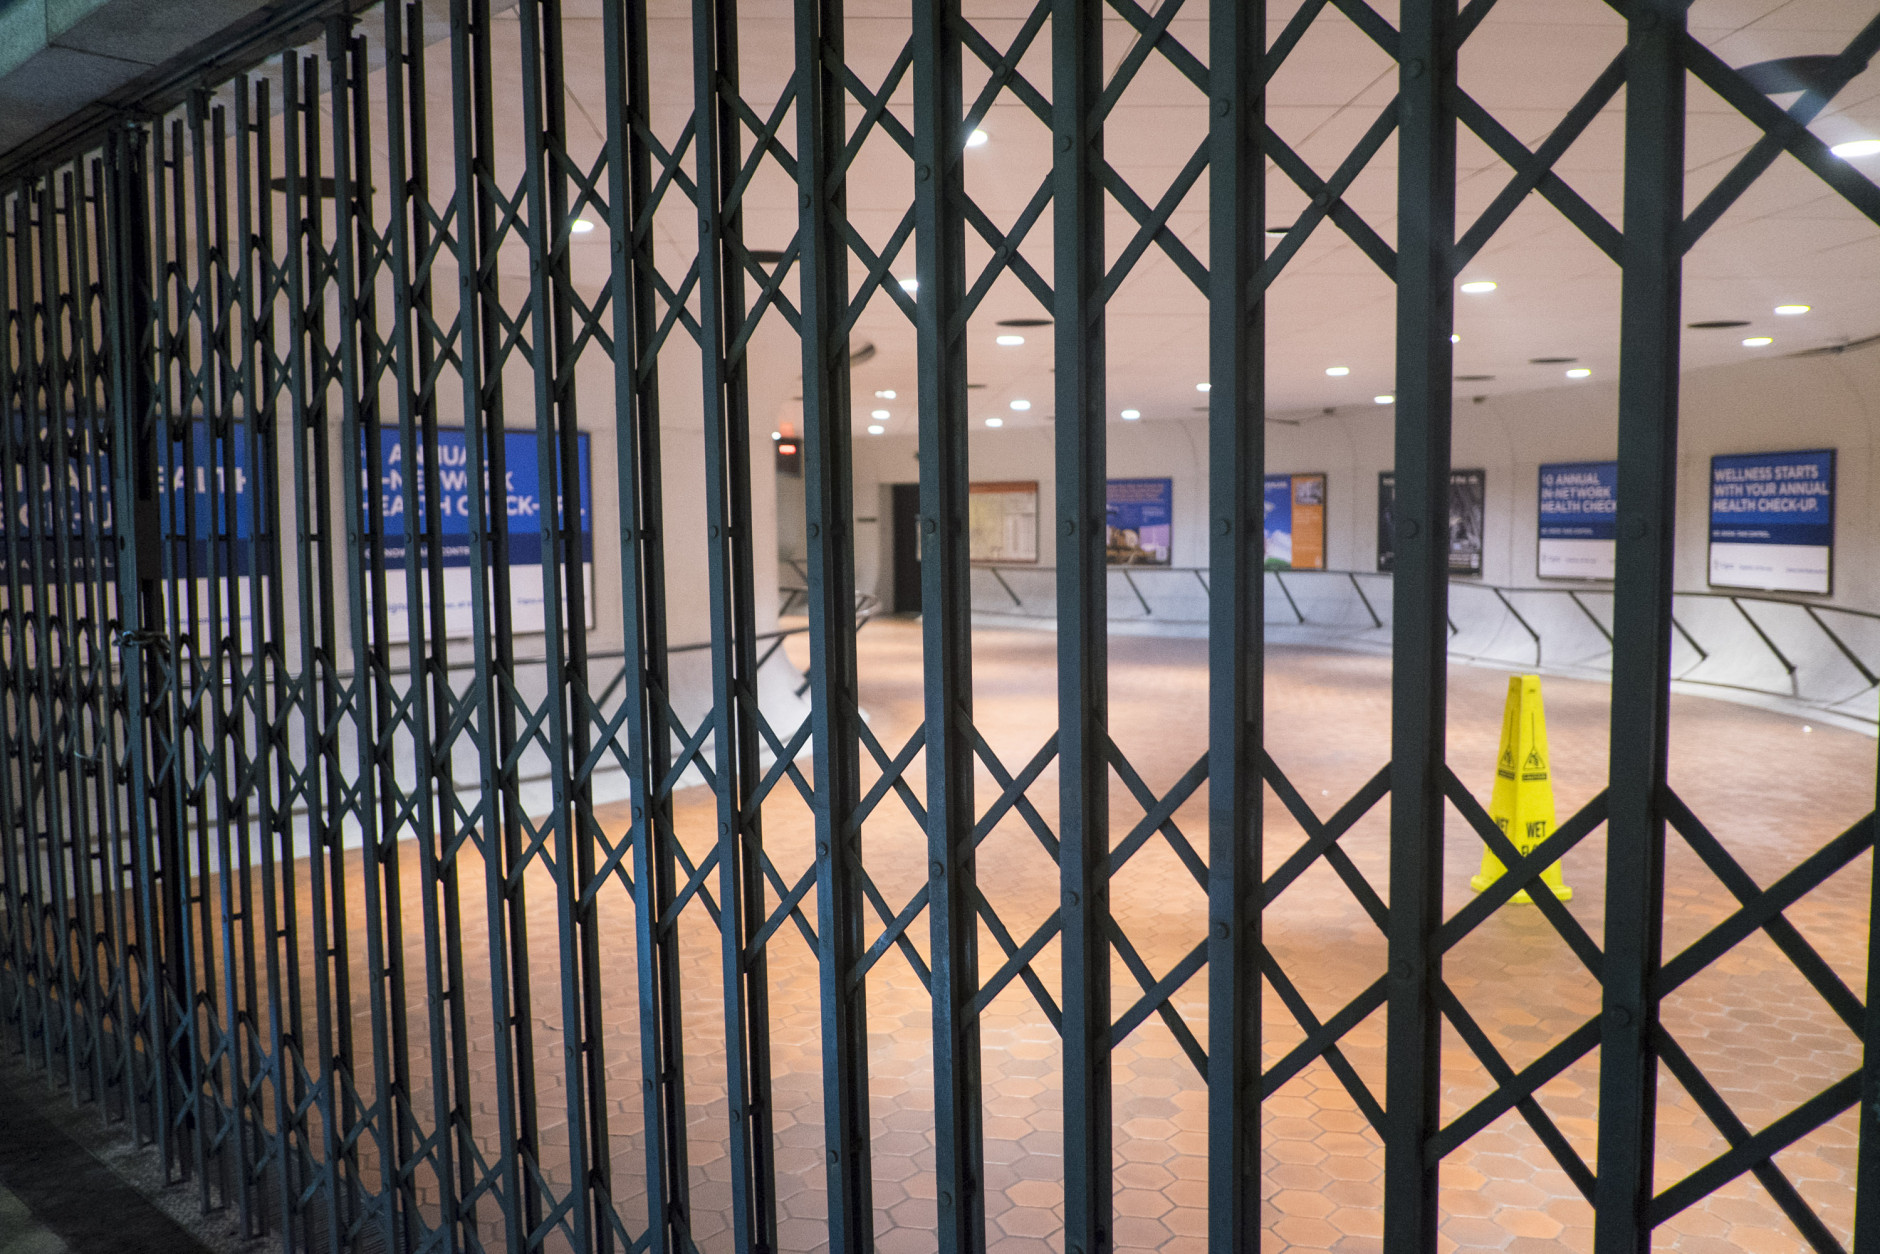 The entrance to the Metro Center station is gated closed during the morning rush hours on March 16, 2016 in Washington, DC. (Photo by Pete Marovich/Getty Images)